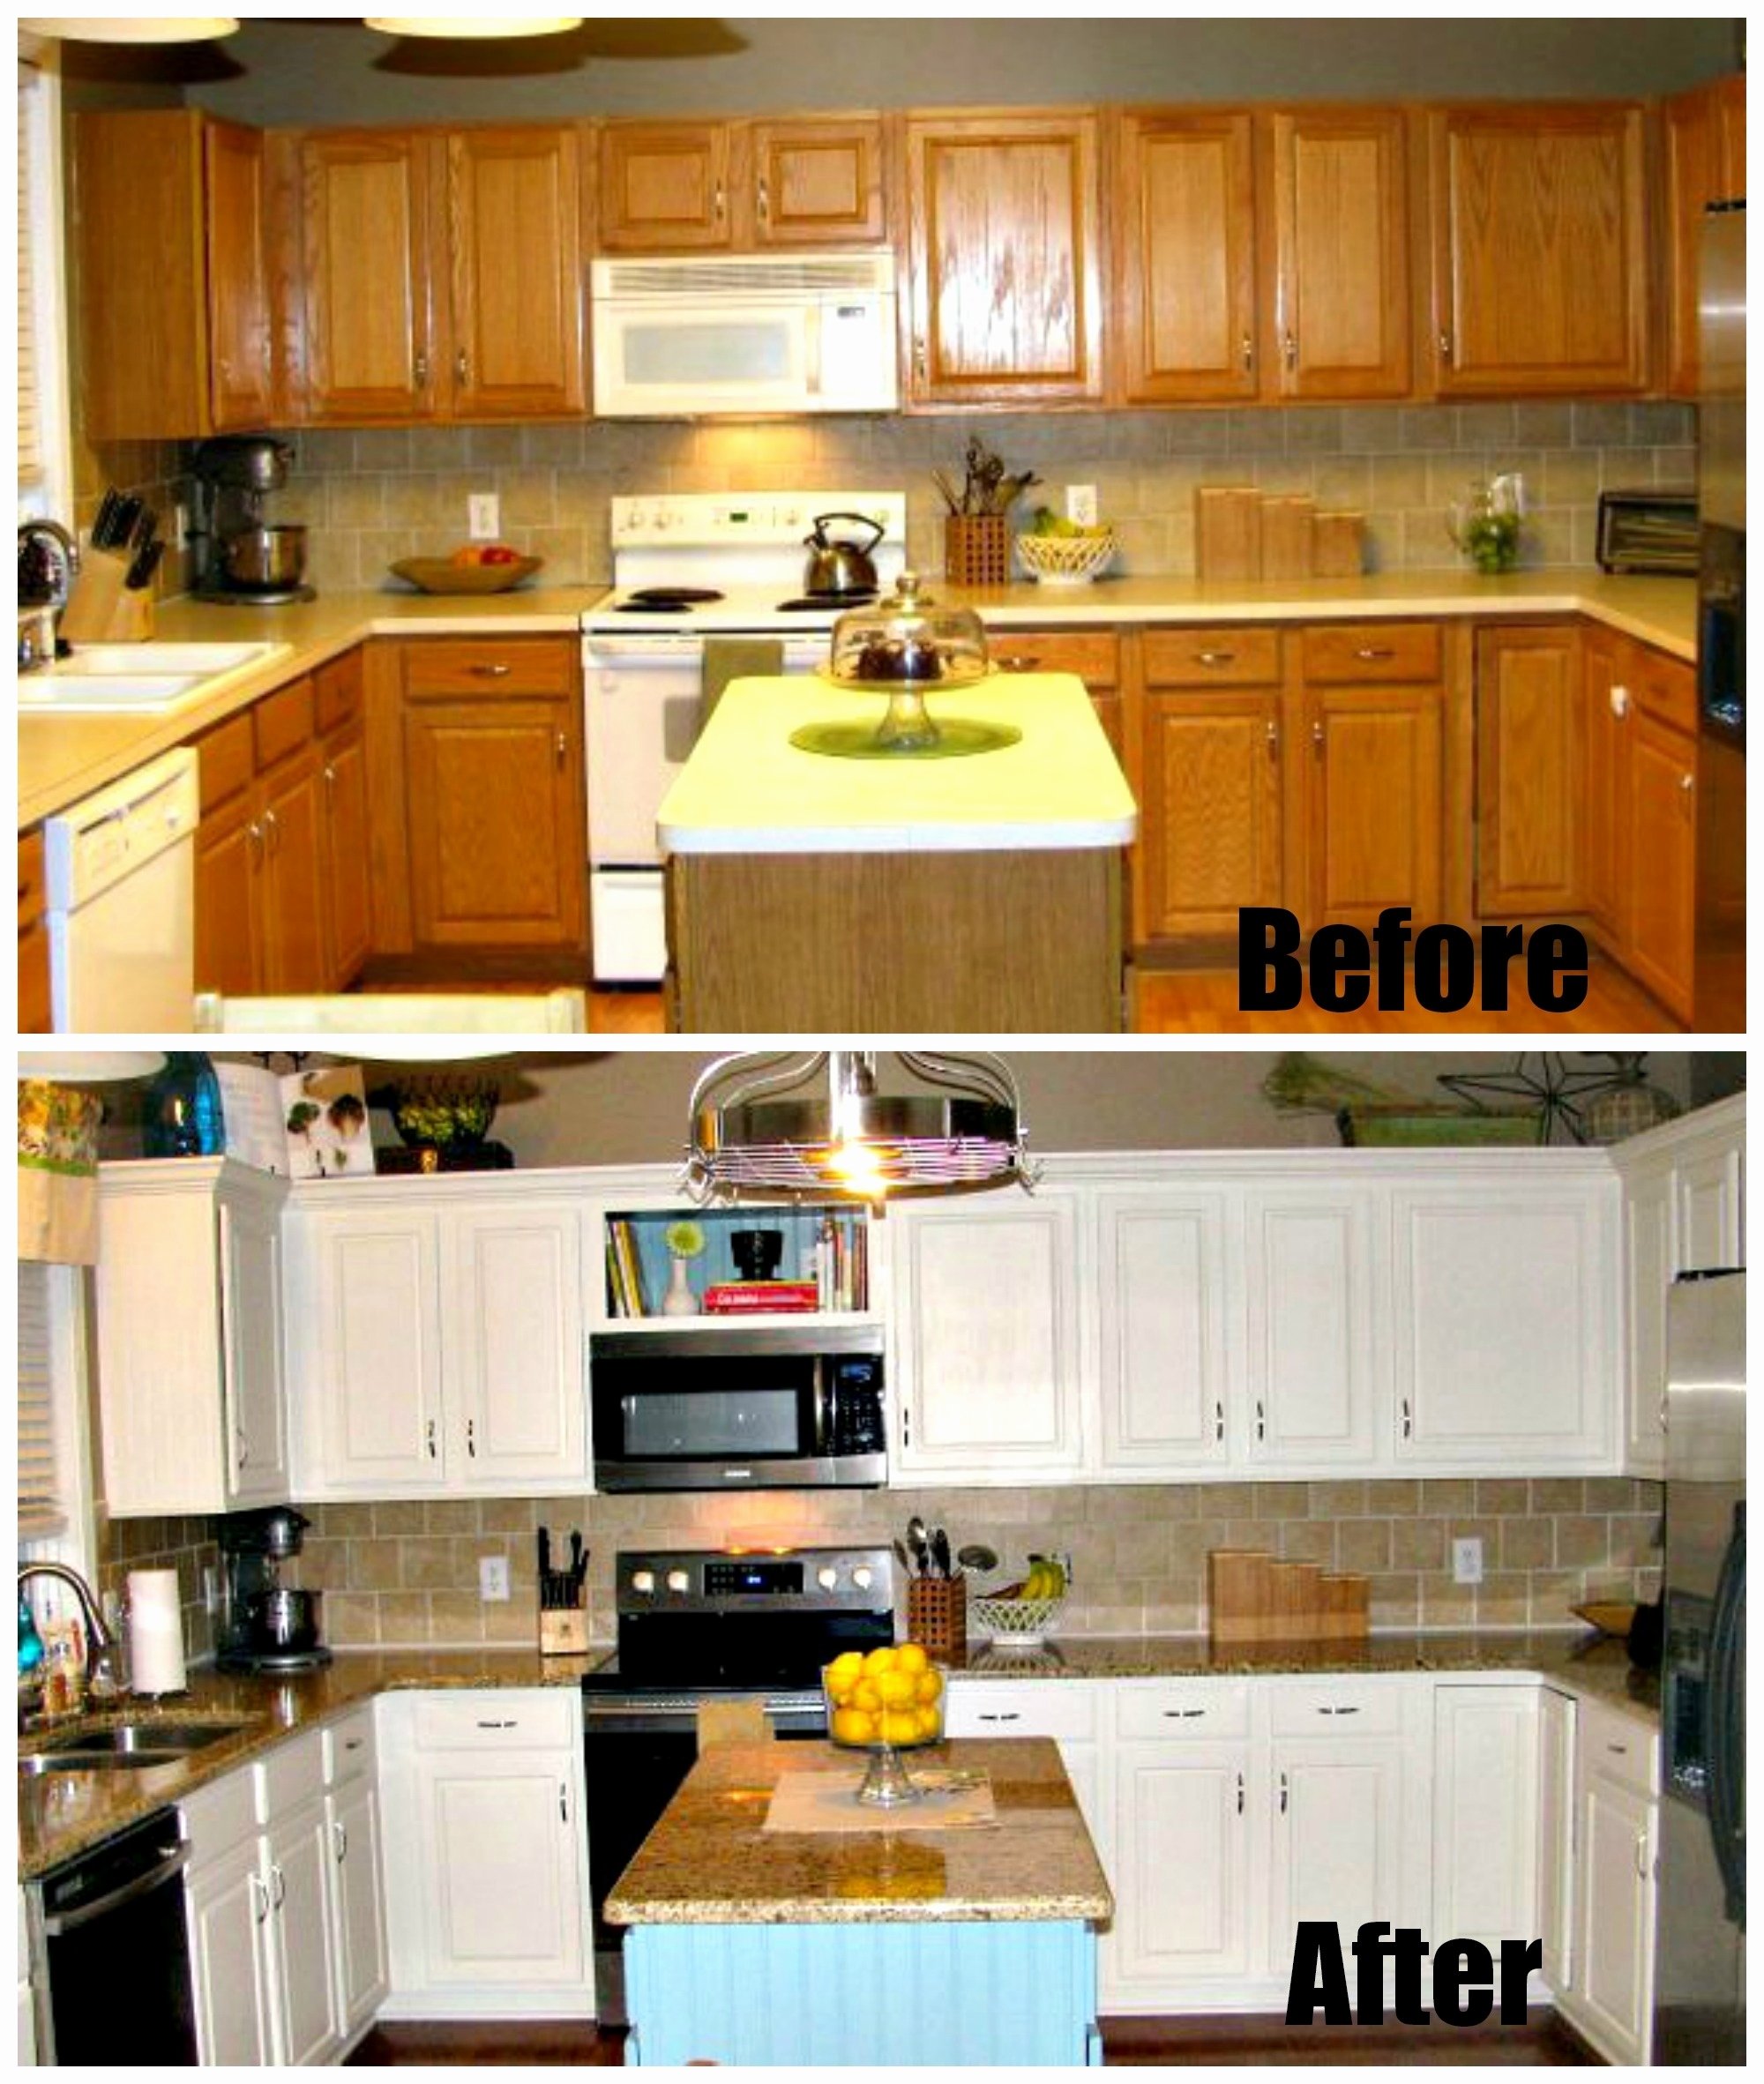  kitchen makeover ideas on a budget